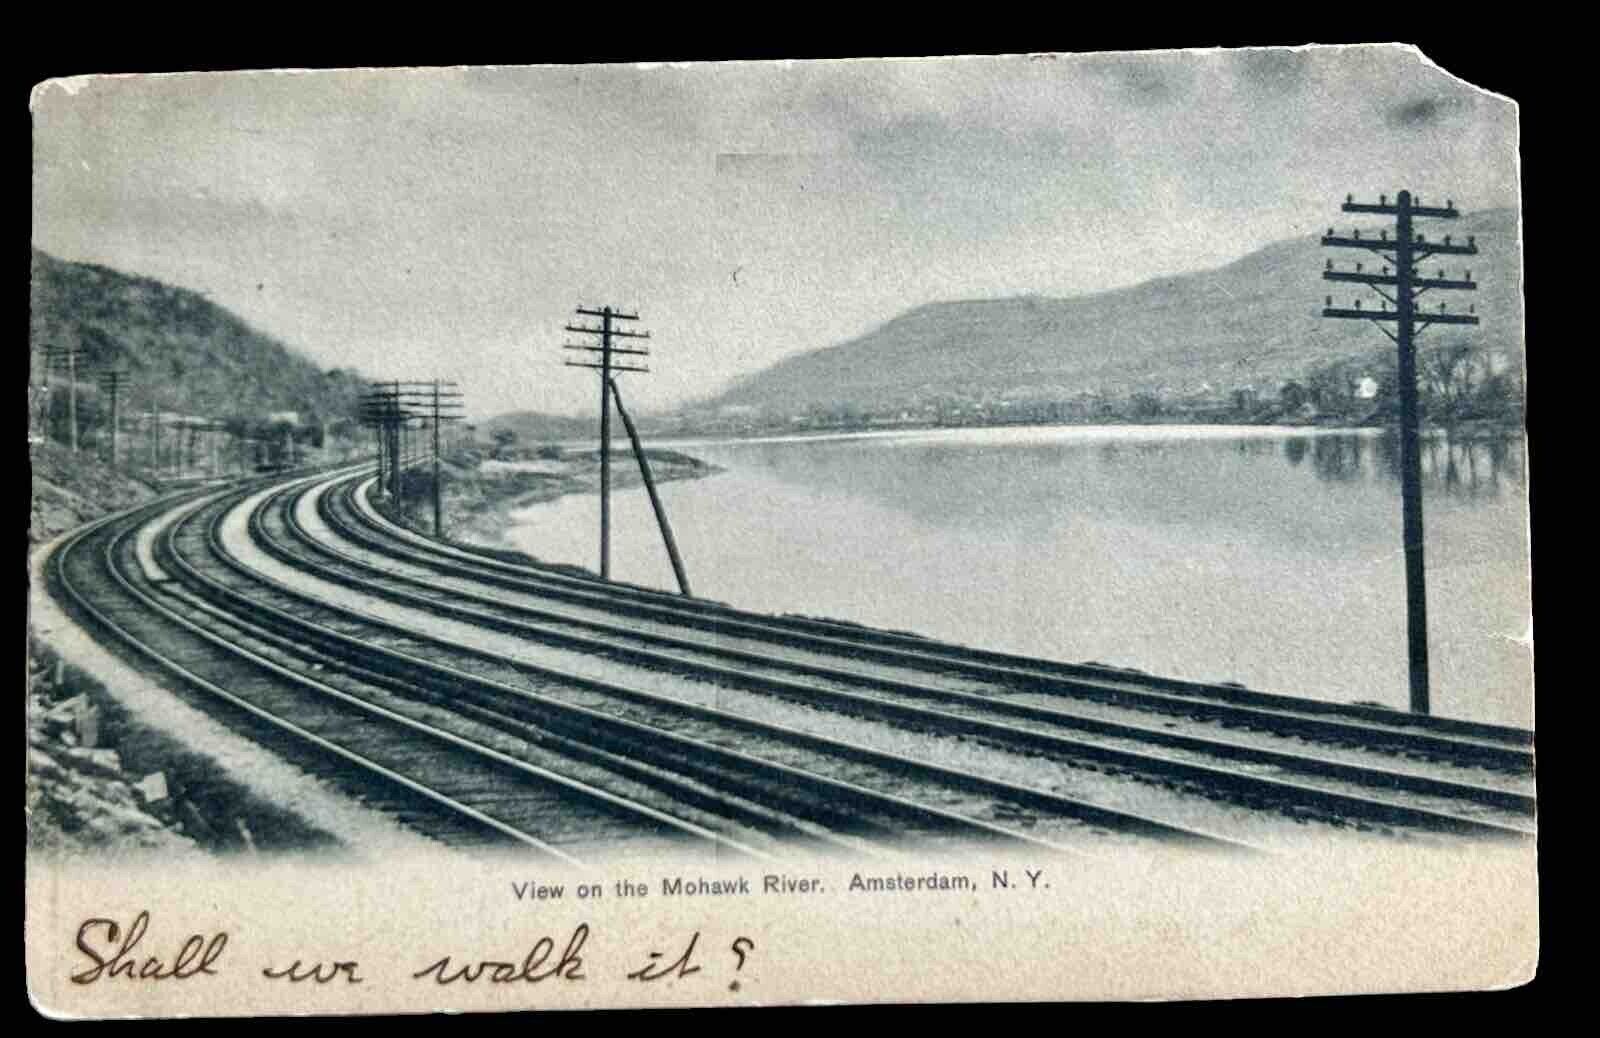 View on the Mohawk River, Amsterdam, N. Y. 1906 Vintage Postcard New York